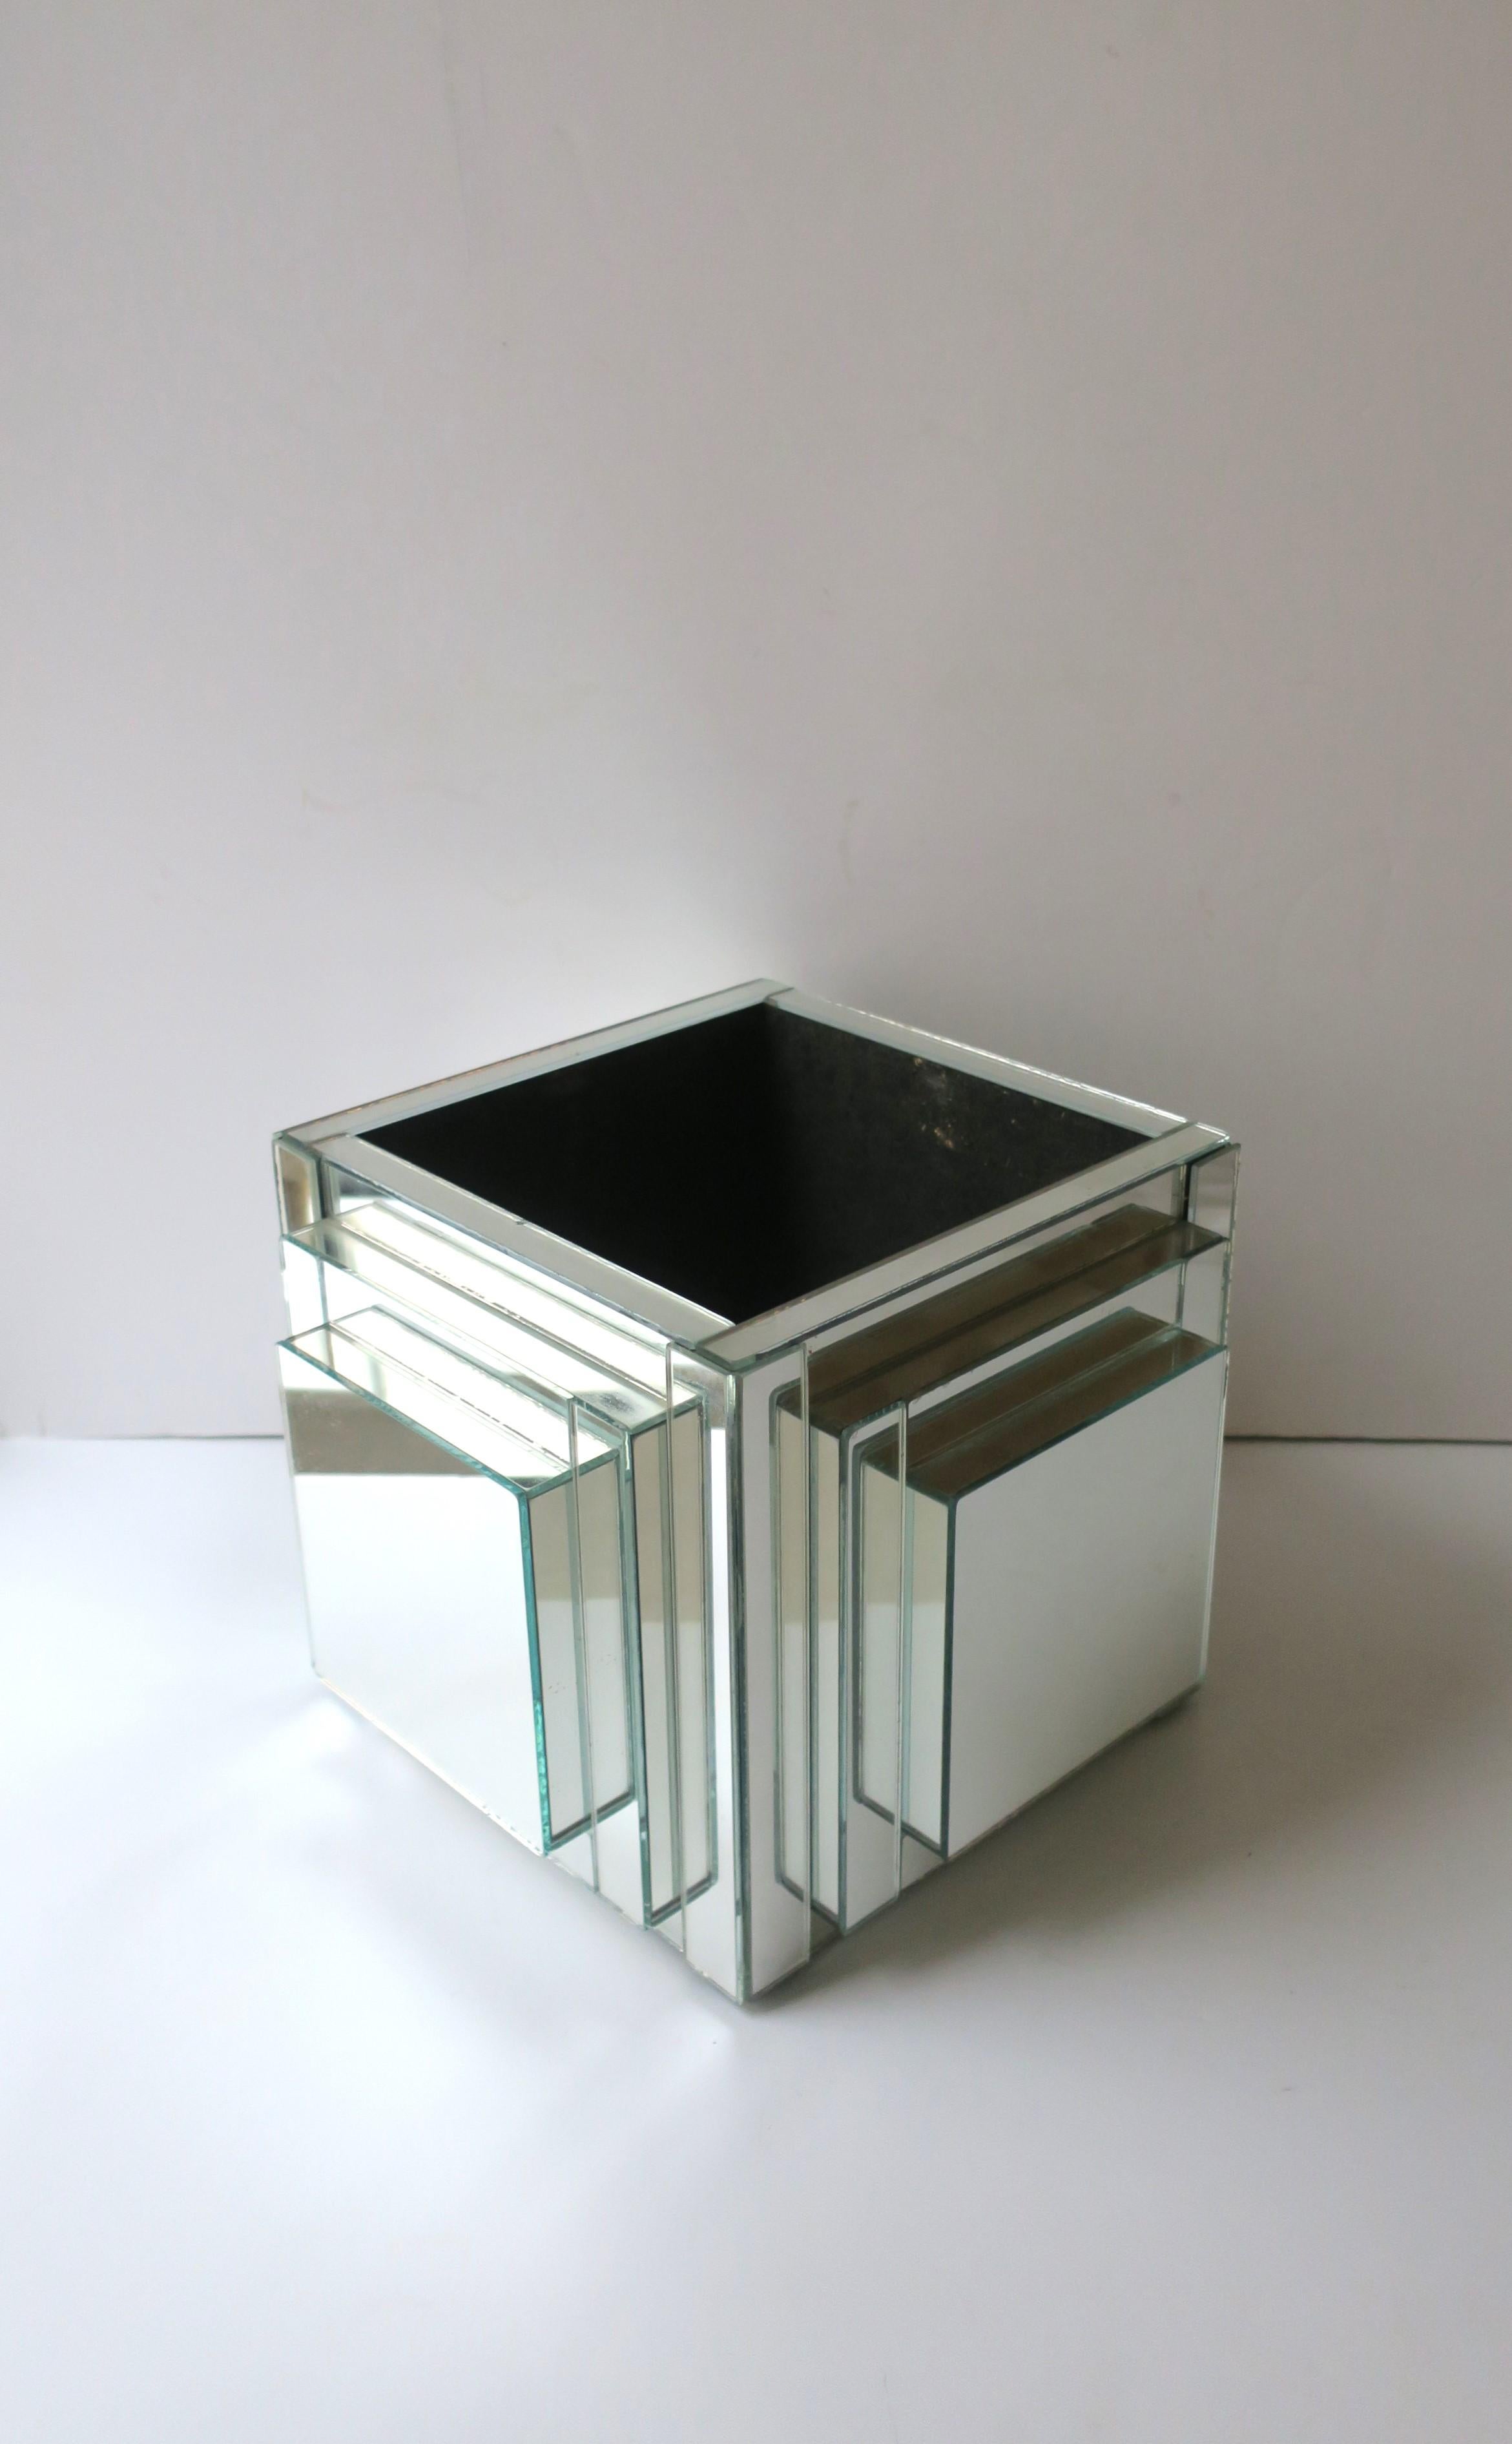 A substantial square mirrored planter cachepot jardinière, '70s Modern/Postmodern period, circa 1970s. Entire piece is mirror with a graduated design. A great piece for a plant or flower, low or high. Piece is strong and can handle a taller plant